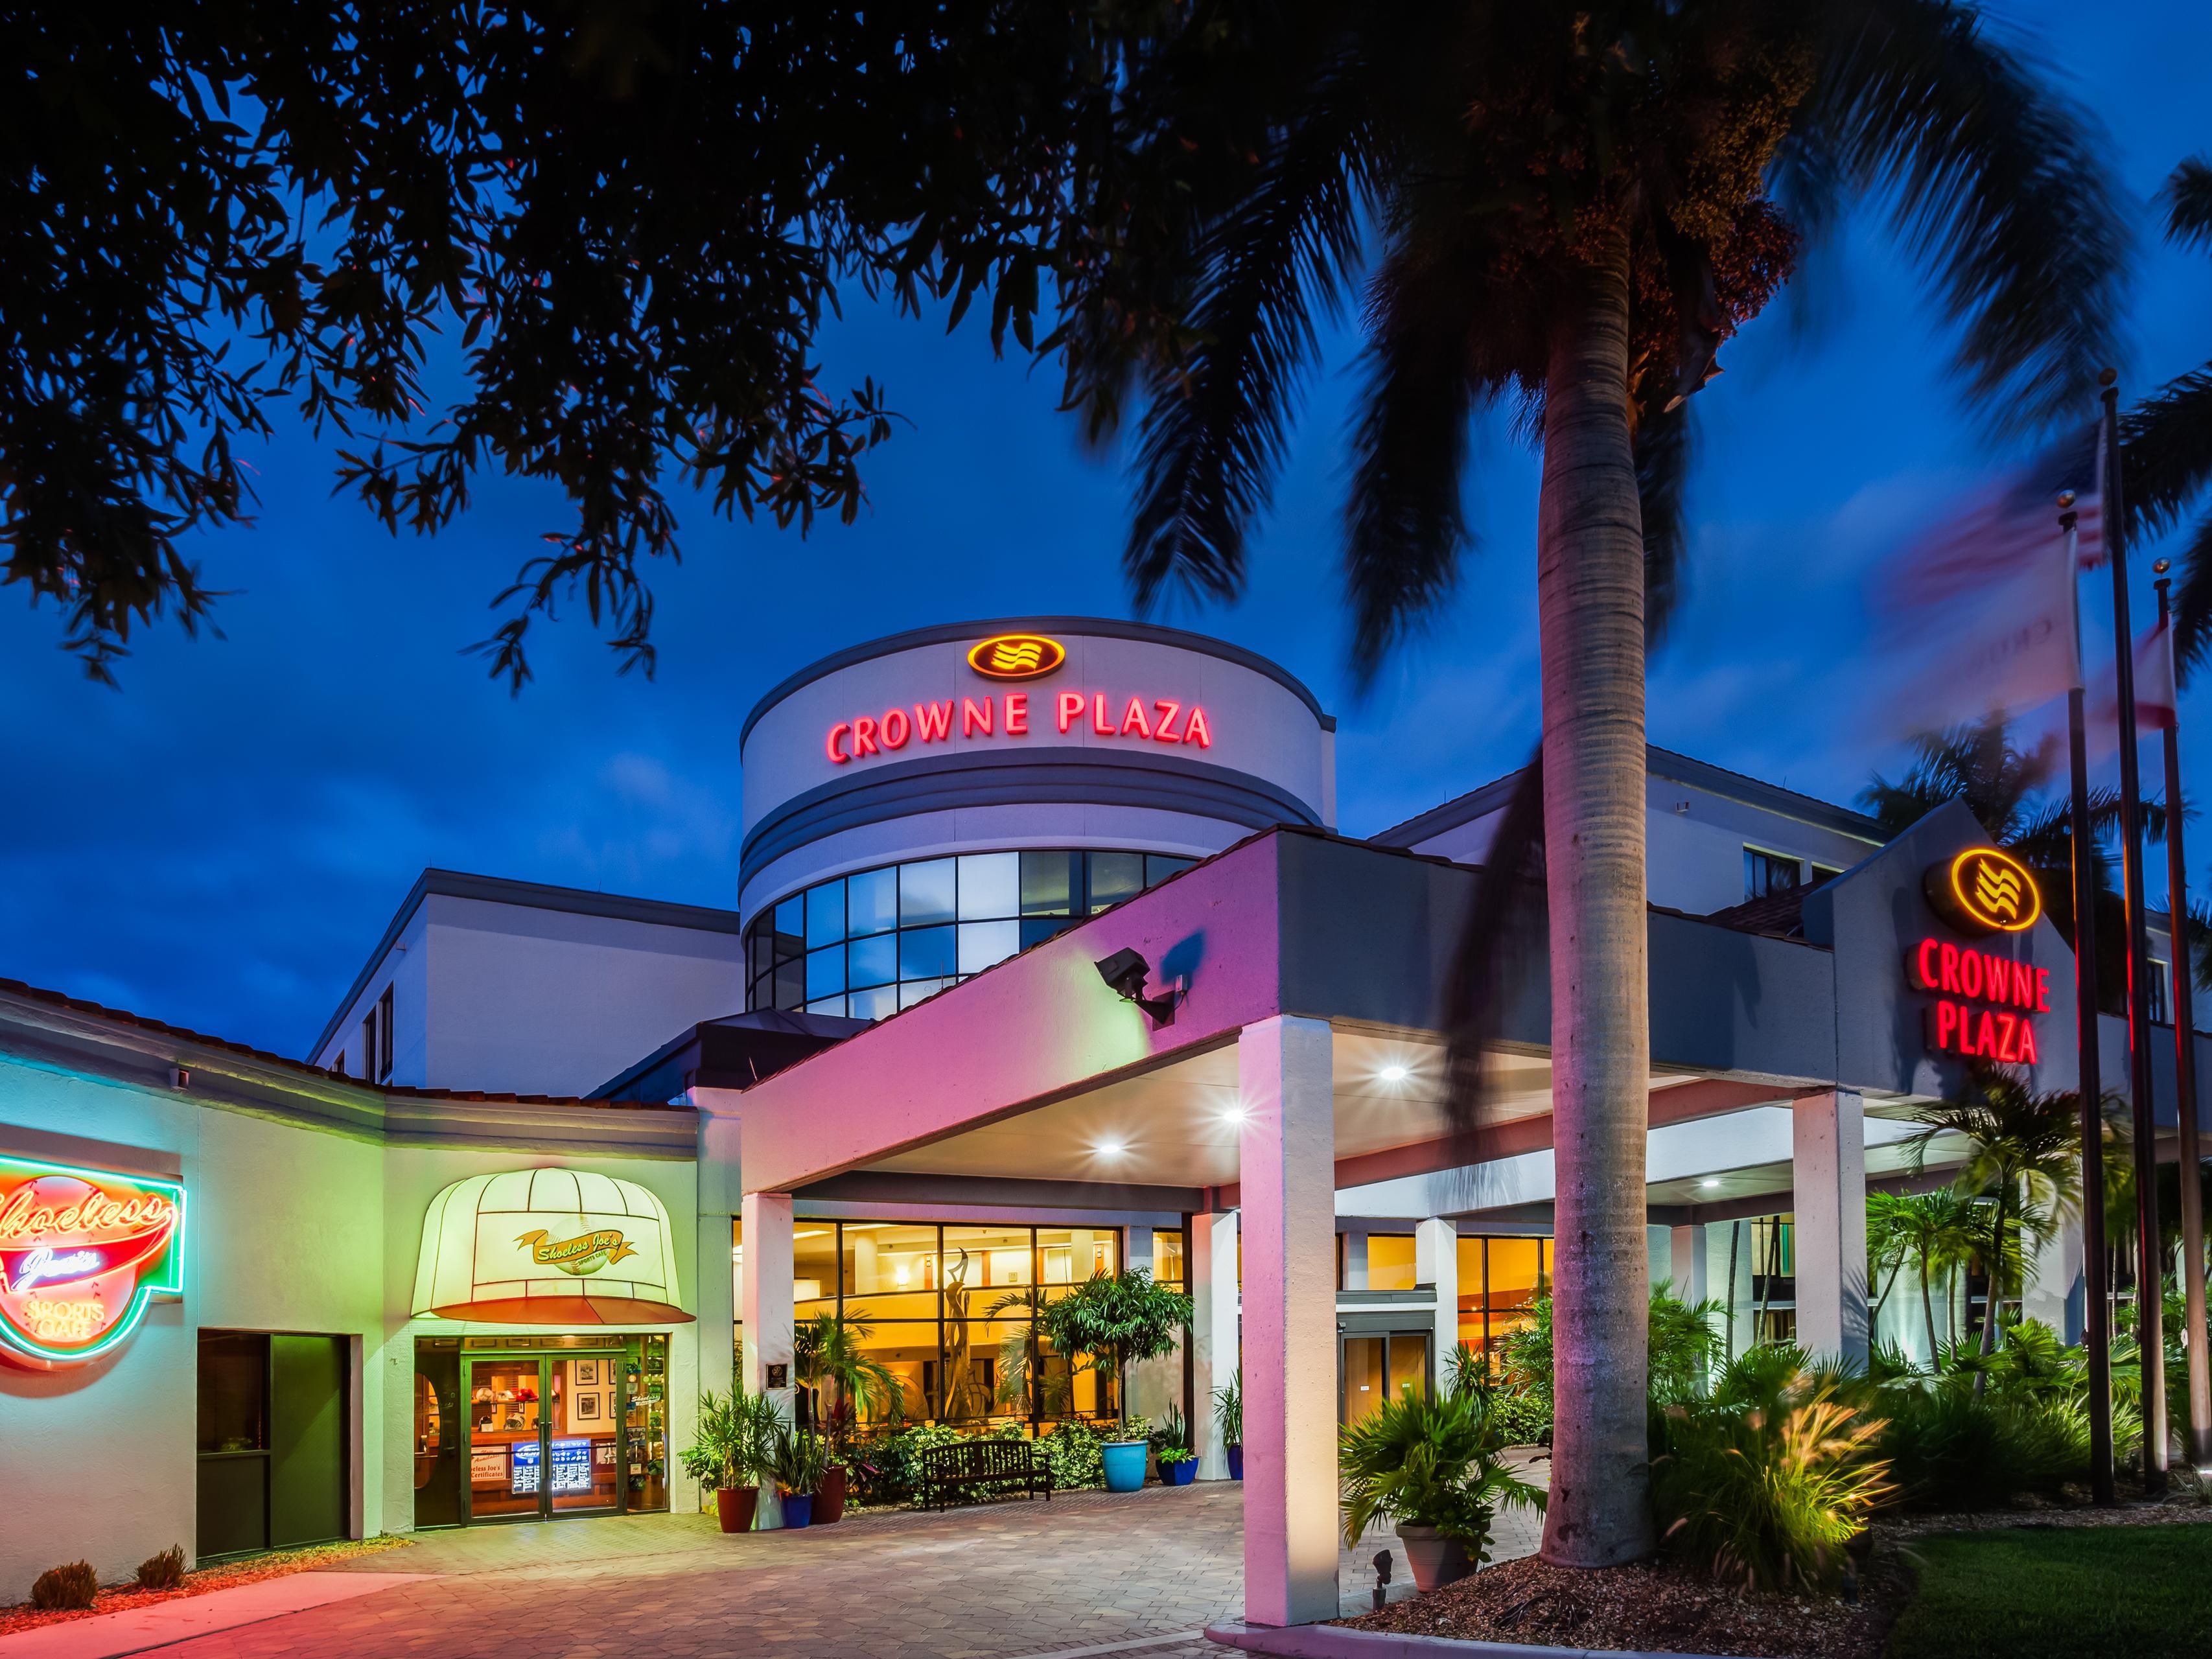 Our hotel is near Hammond Stadium in the Lee County Sports Complex. Drive to Cape Coral or enjoy a sunny day at Fort Myers Beach and Sanibel Island with the family. The hotel is close to major Ft. Myers businesses, including the Chicos’ Headquarters, Florida Southwestern University, and the Florida Cancer Specialists, and the Gulfcoast Hospital.